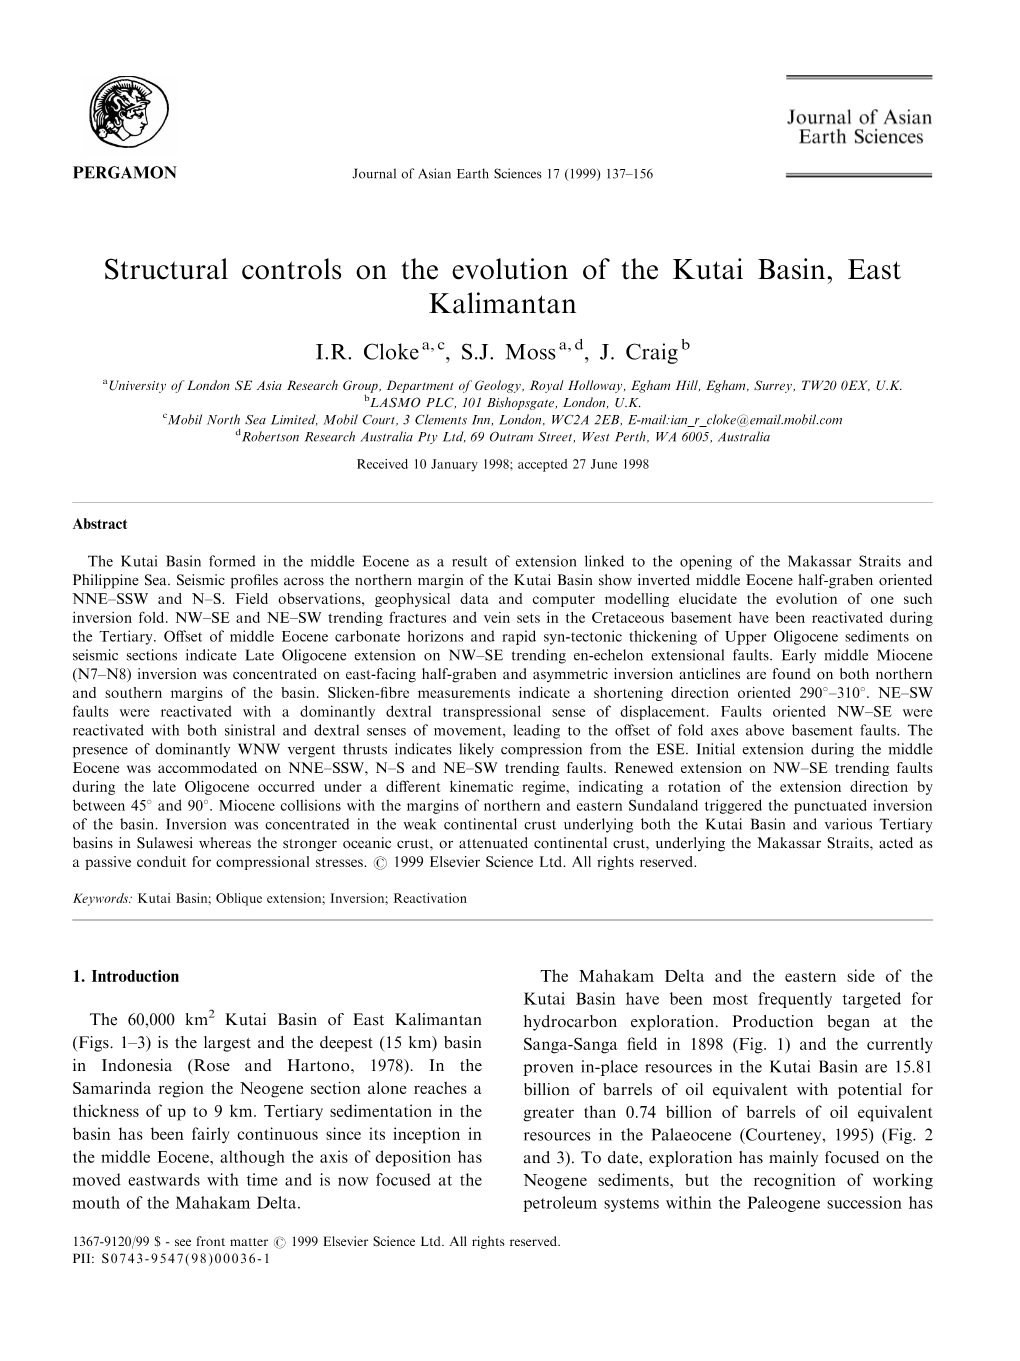 Structural Controls on the Evolution of the Kutai Basin, East Kalimantan